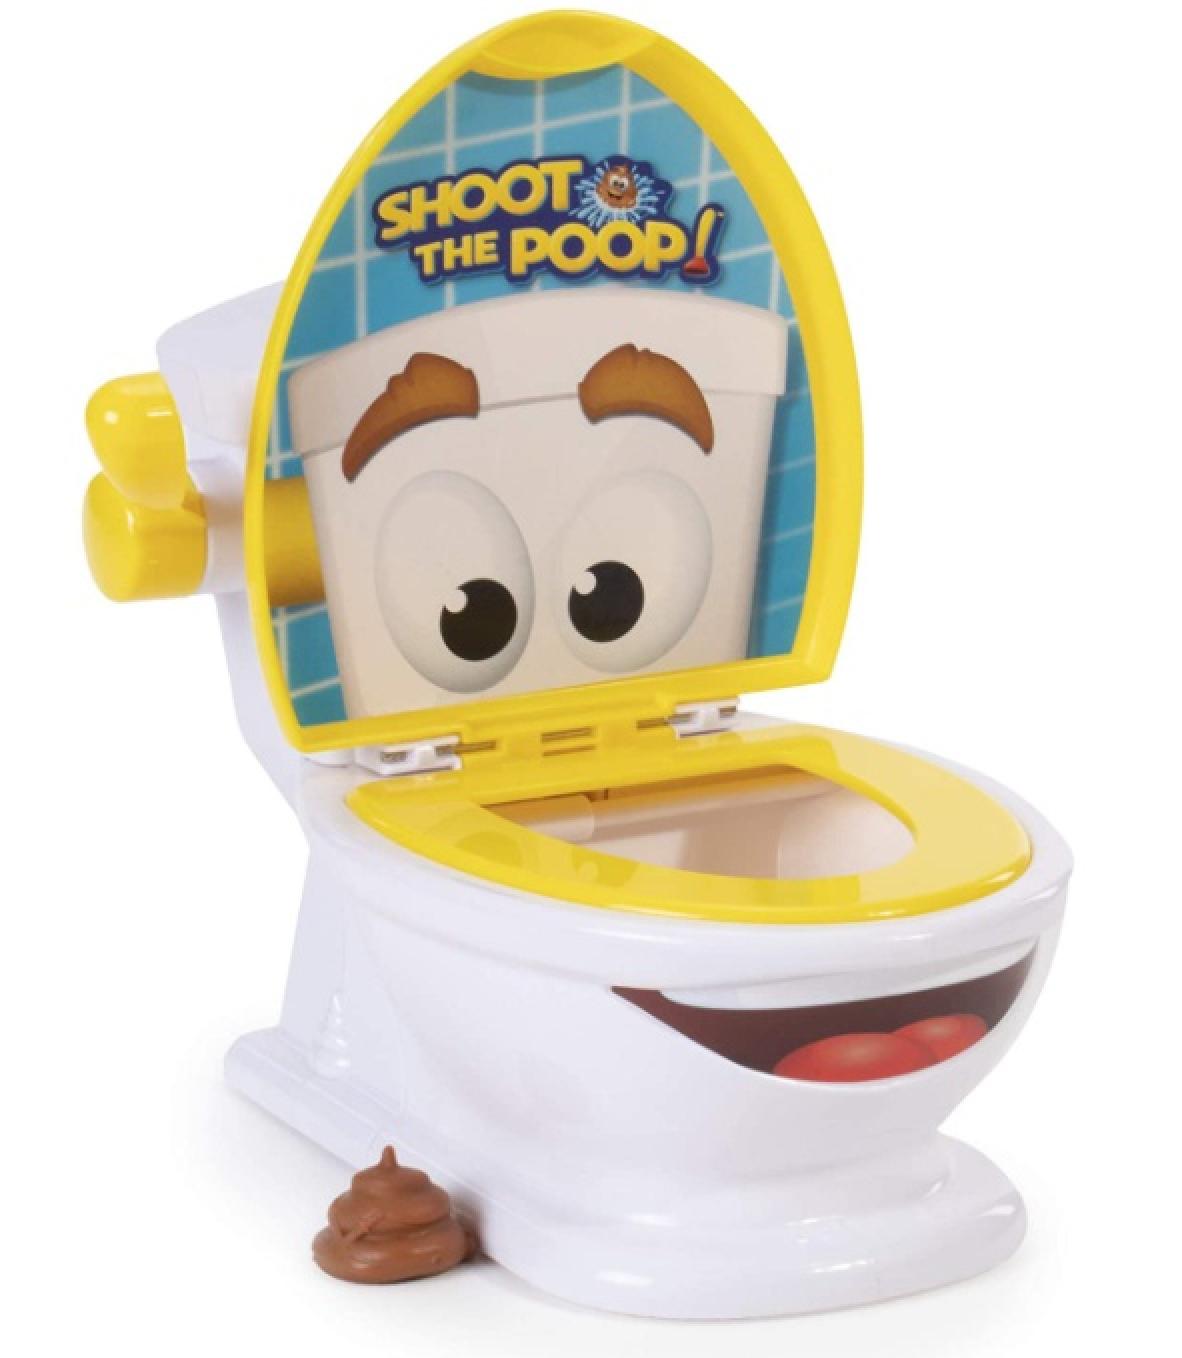 Shoot The Poop Game - Brybelly Toilet